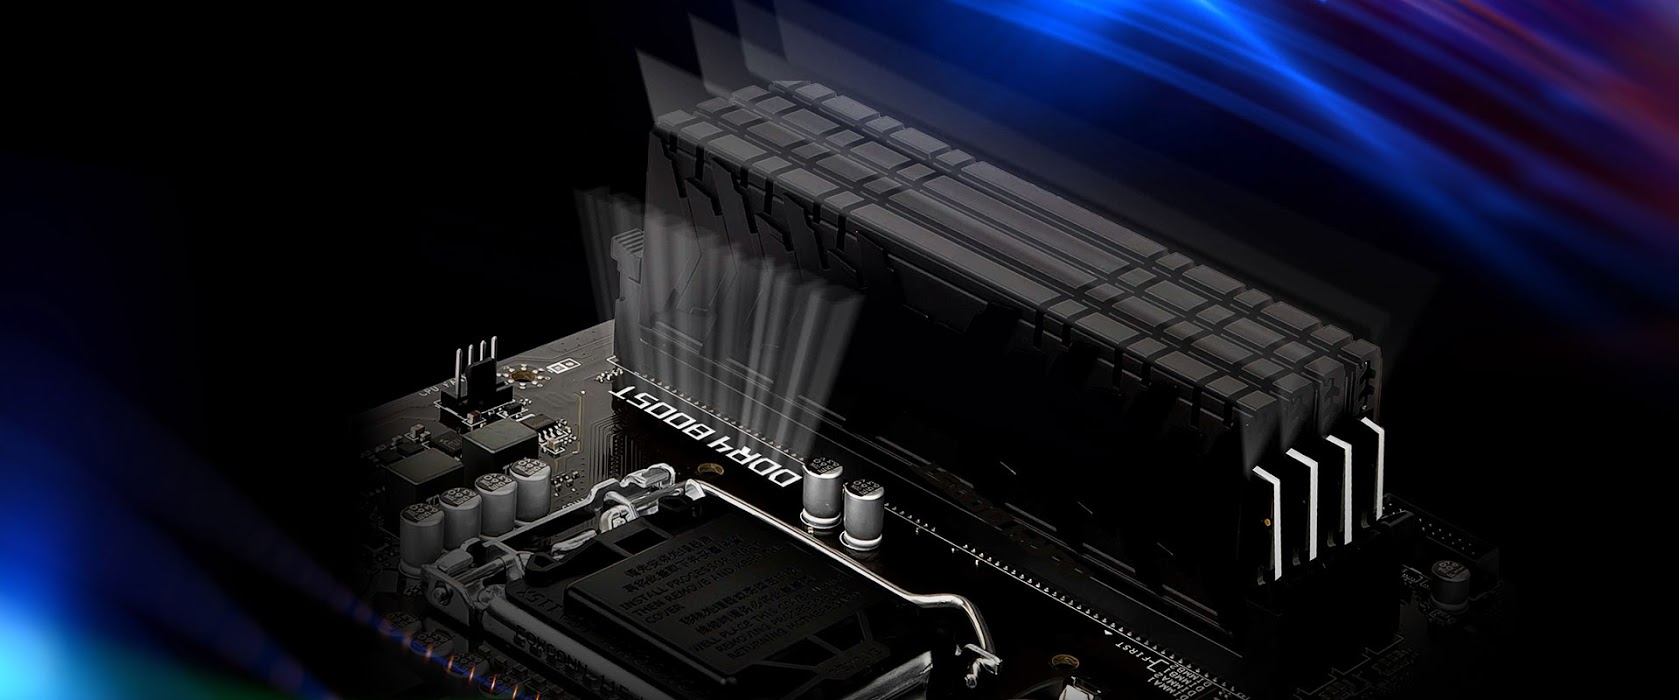 a motherboard as background